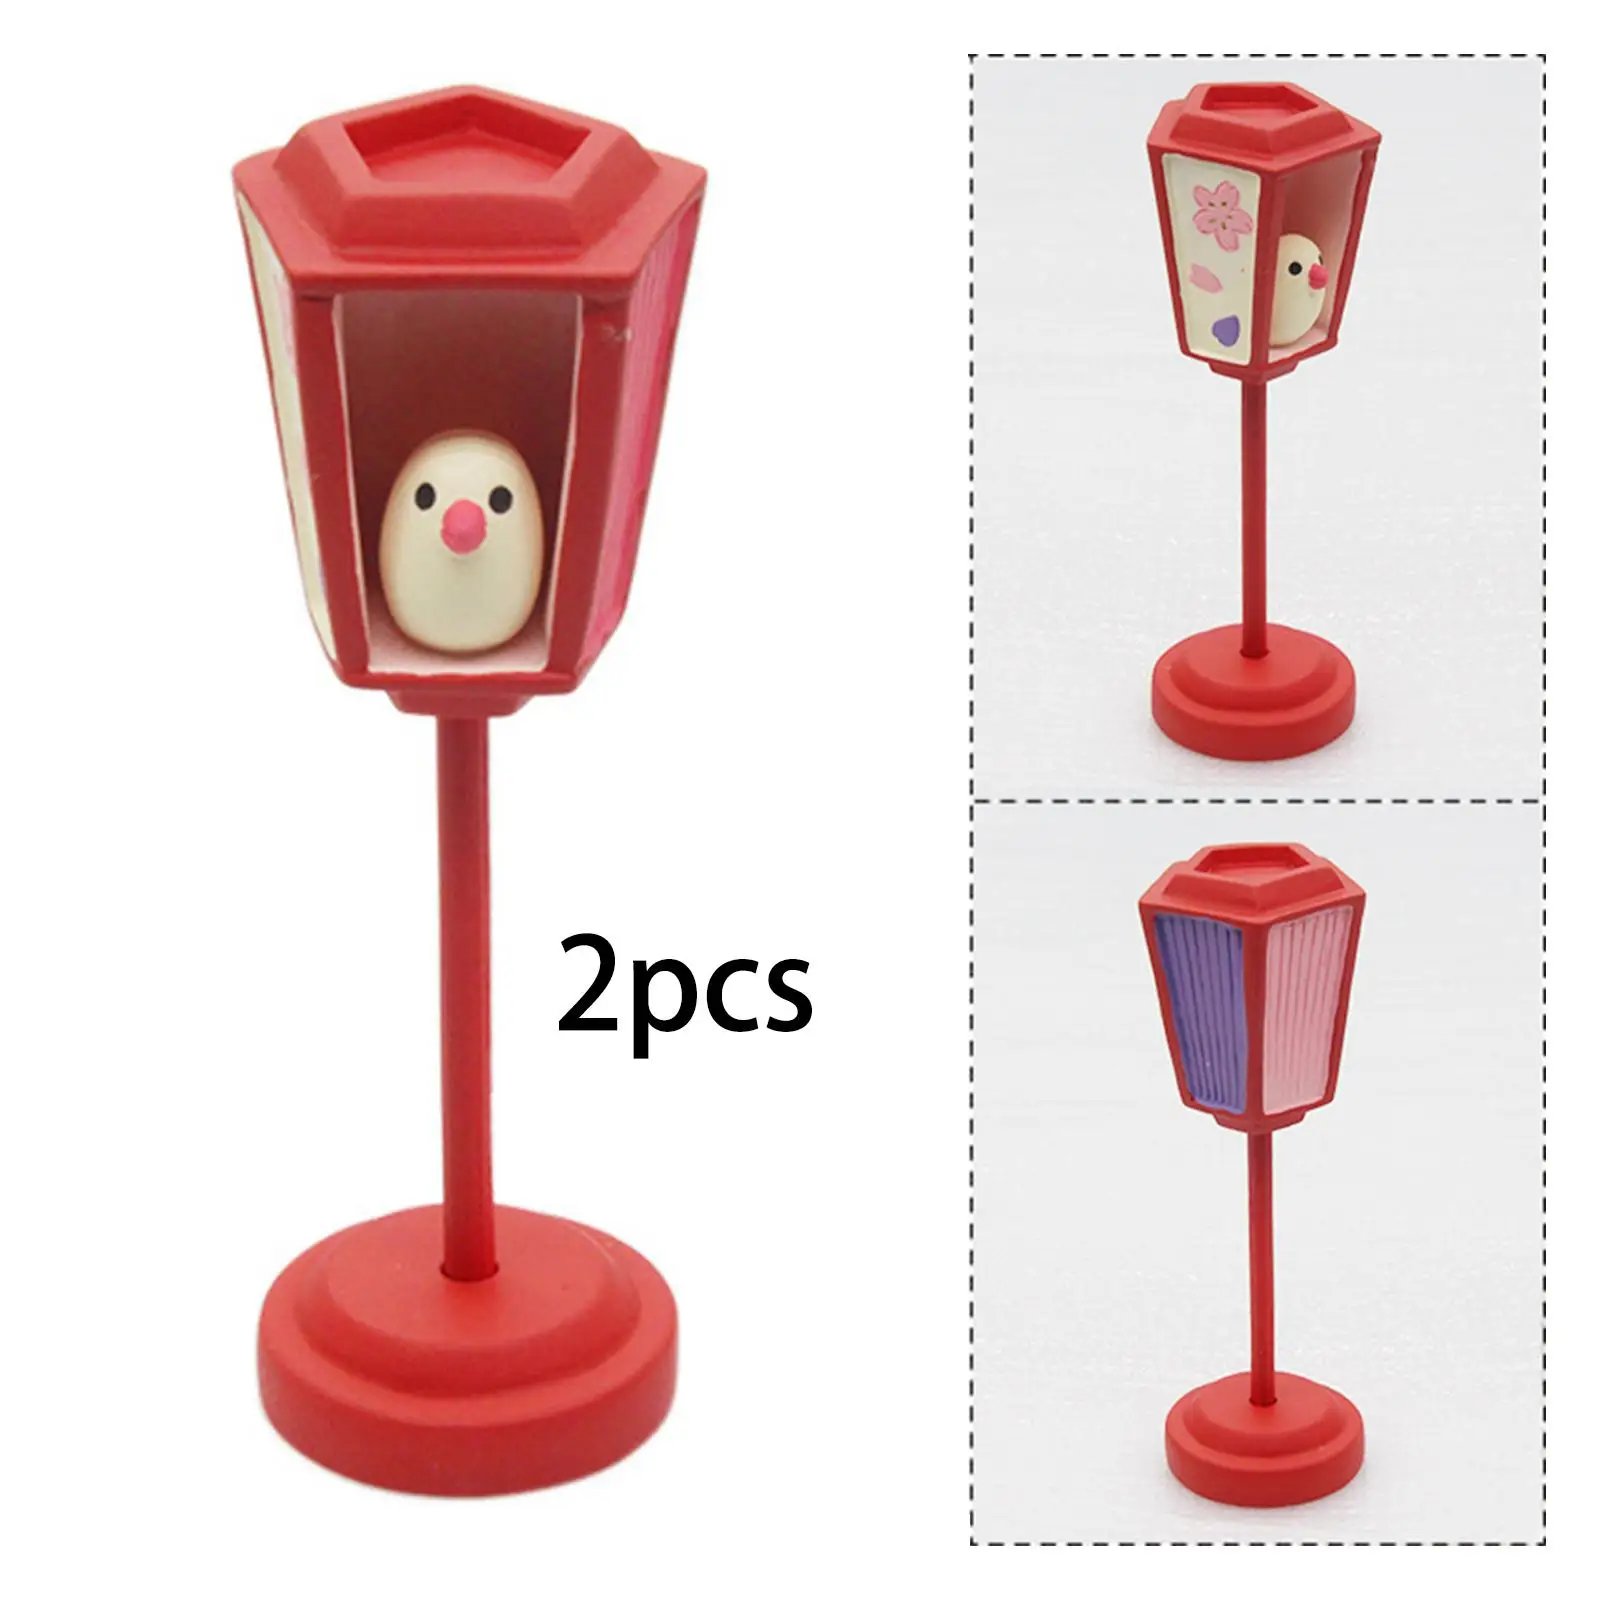 2Pcs Doll House Decoration Resin Building Toy Lantern for Dollhouses Life Scene Props